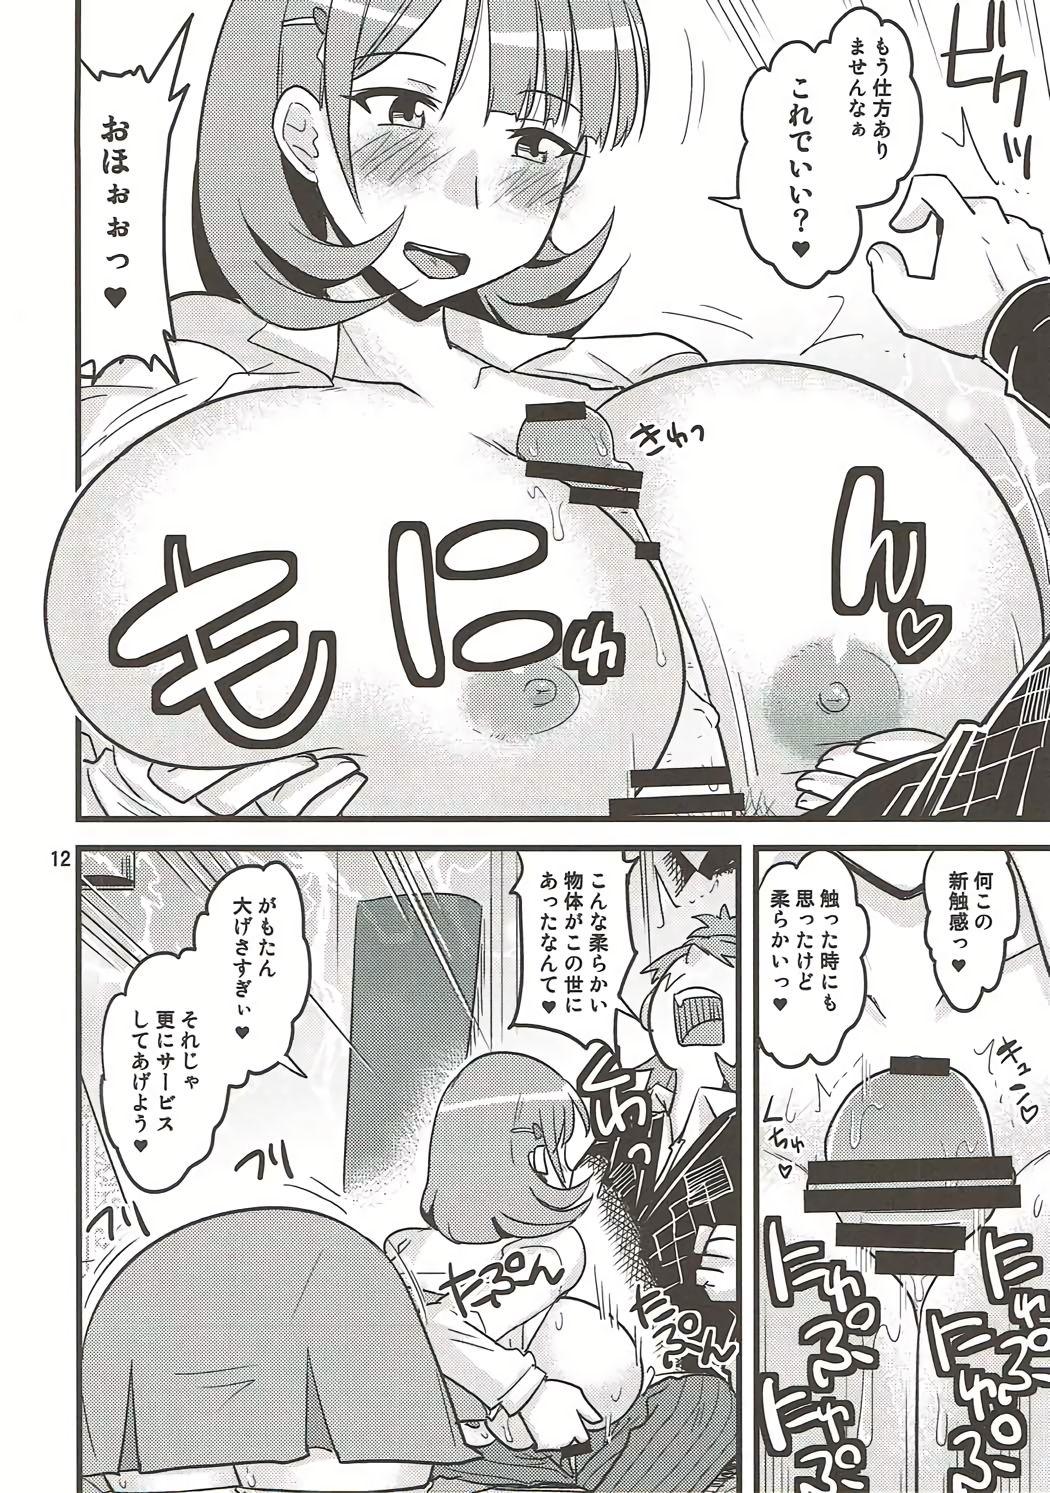 Big Pussy さおりん愛され日記 - Occultic nine T Girl - Page 11